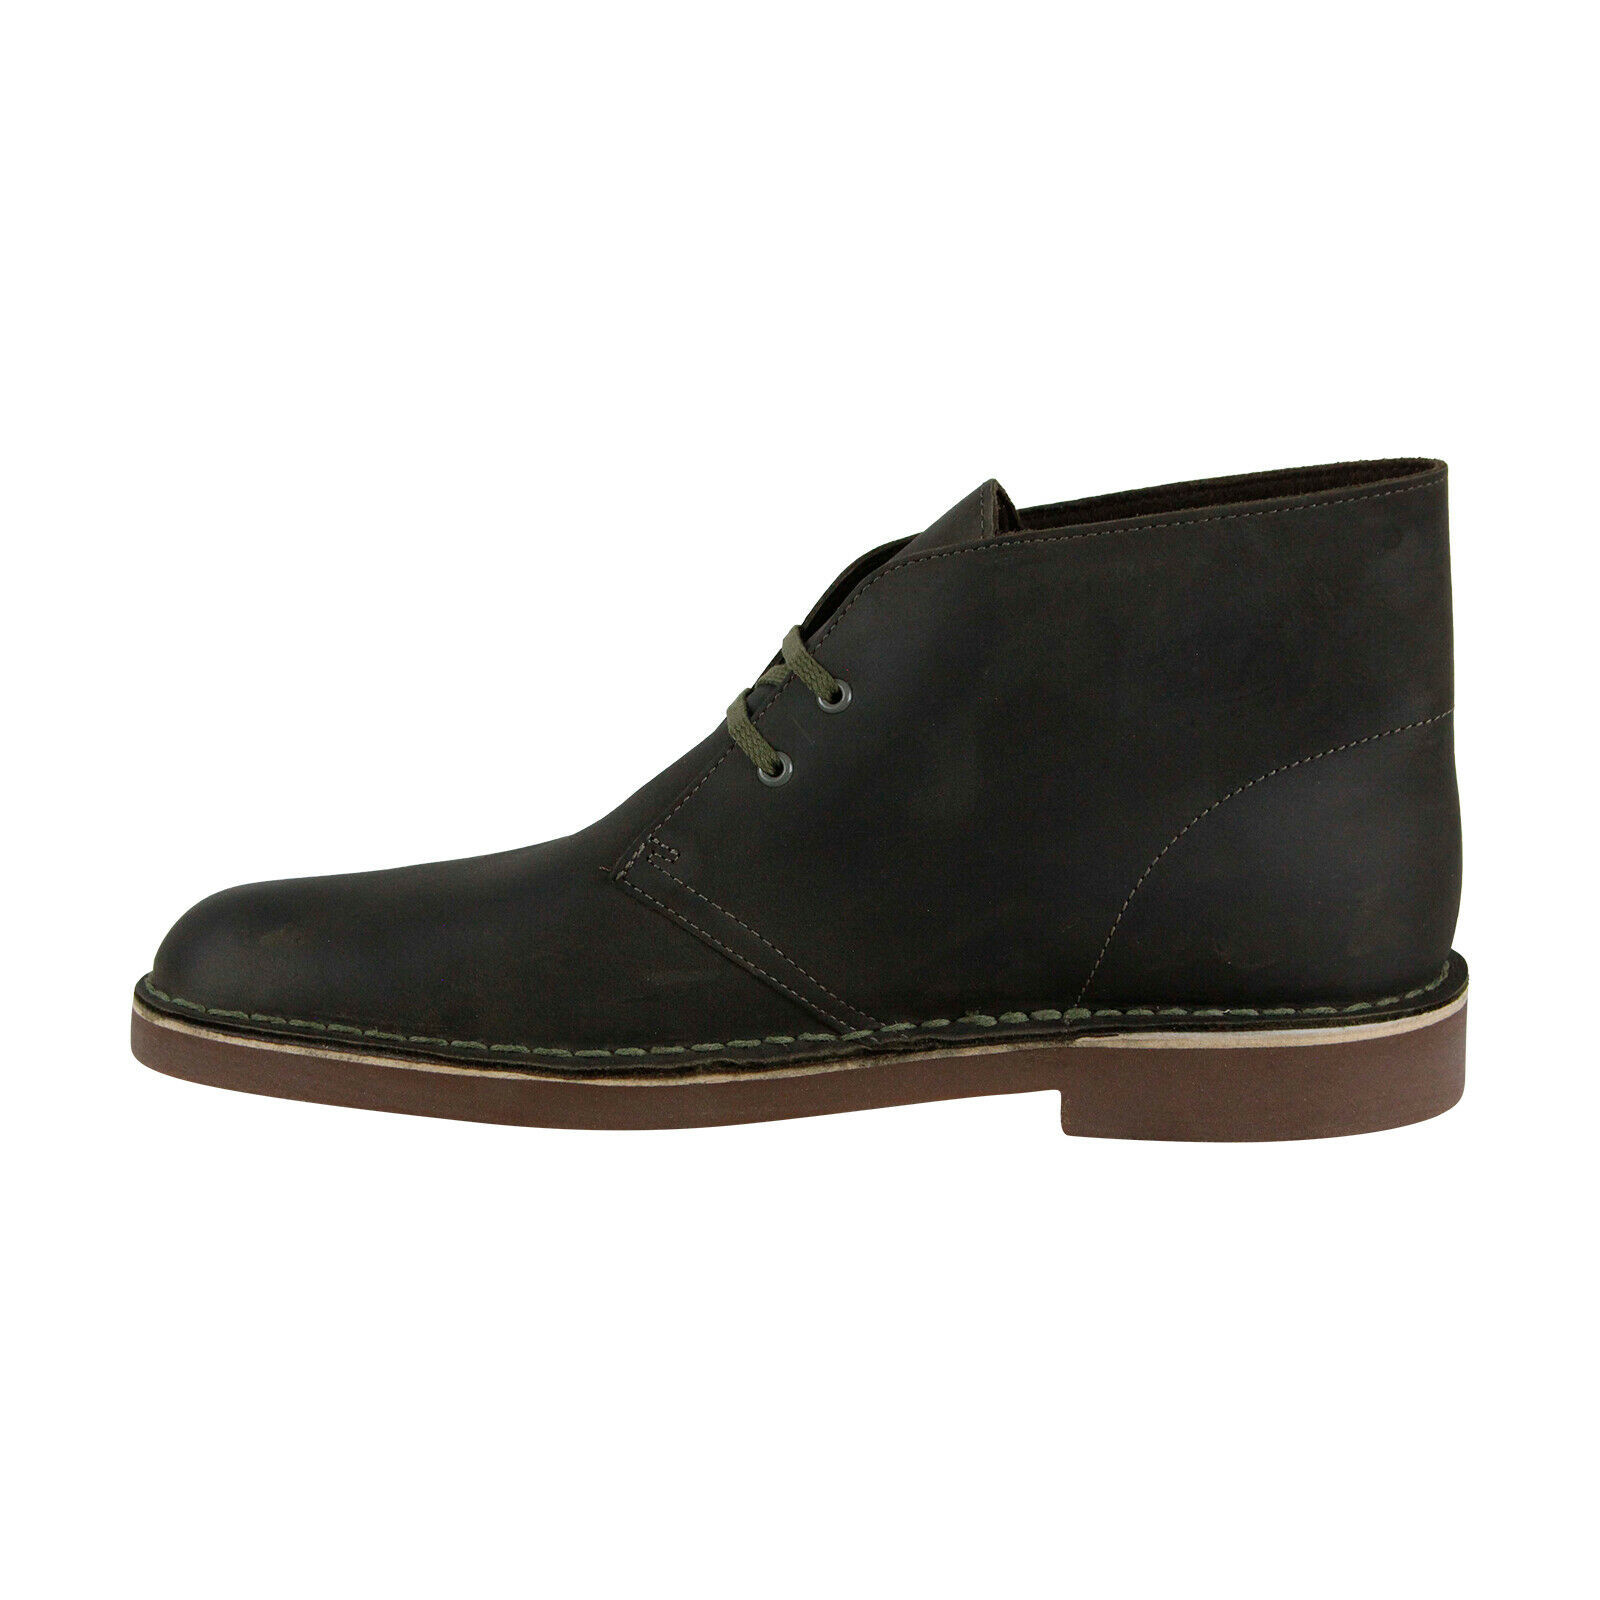 Clarks Bushacre 2 Men's Green Leather Casual Desert Boot - Casual